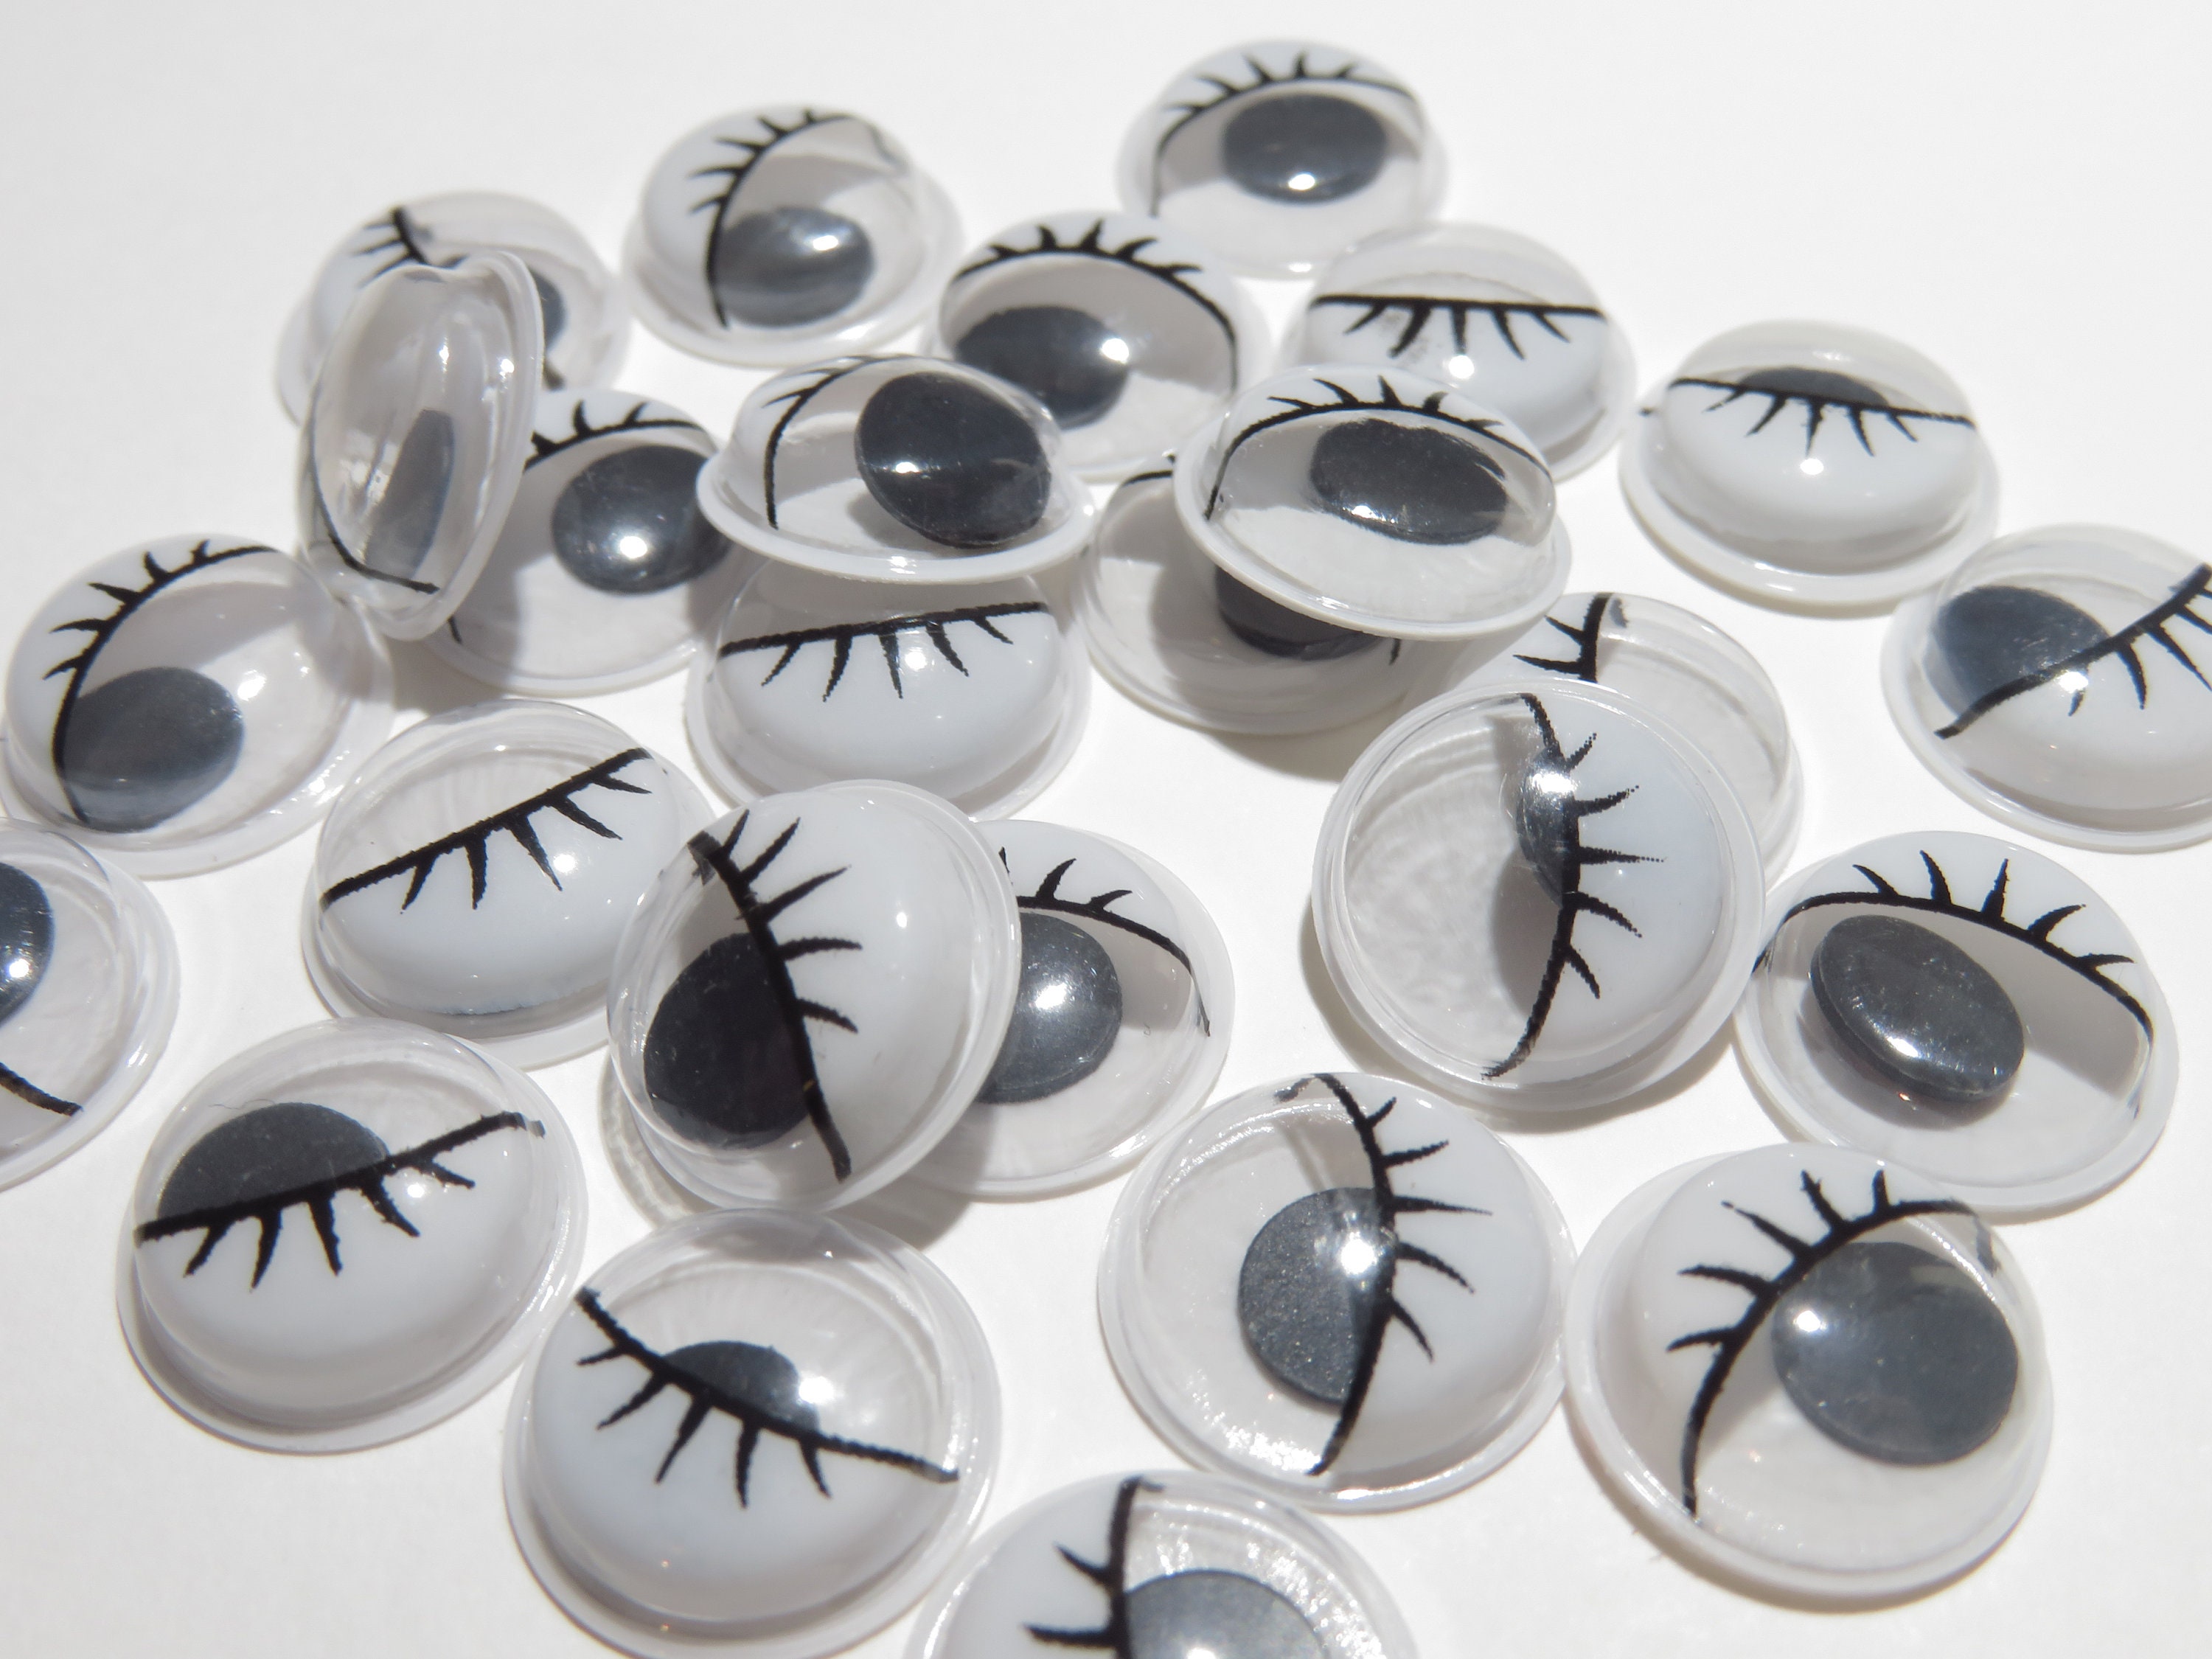  16 Pieces 6 Inch Giant Googly Eyes Halloween Plastic